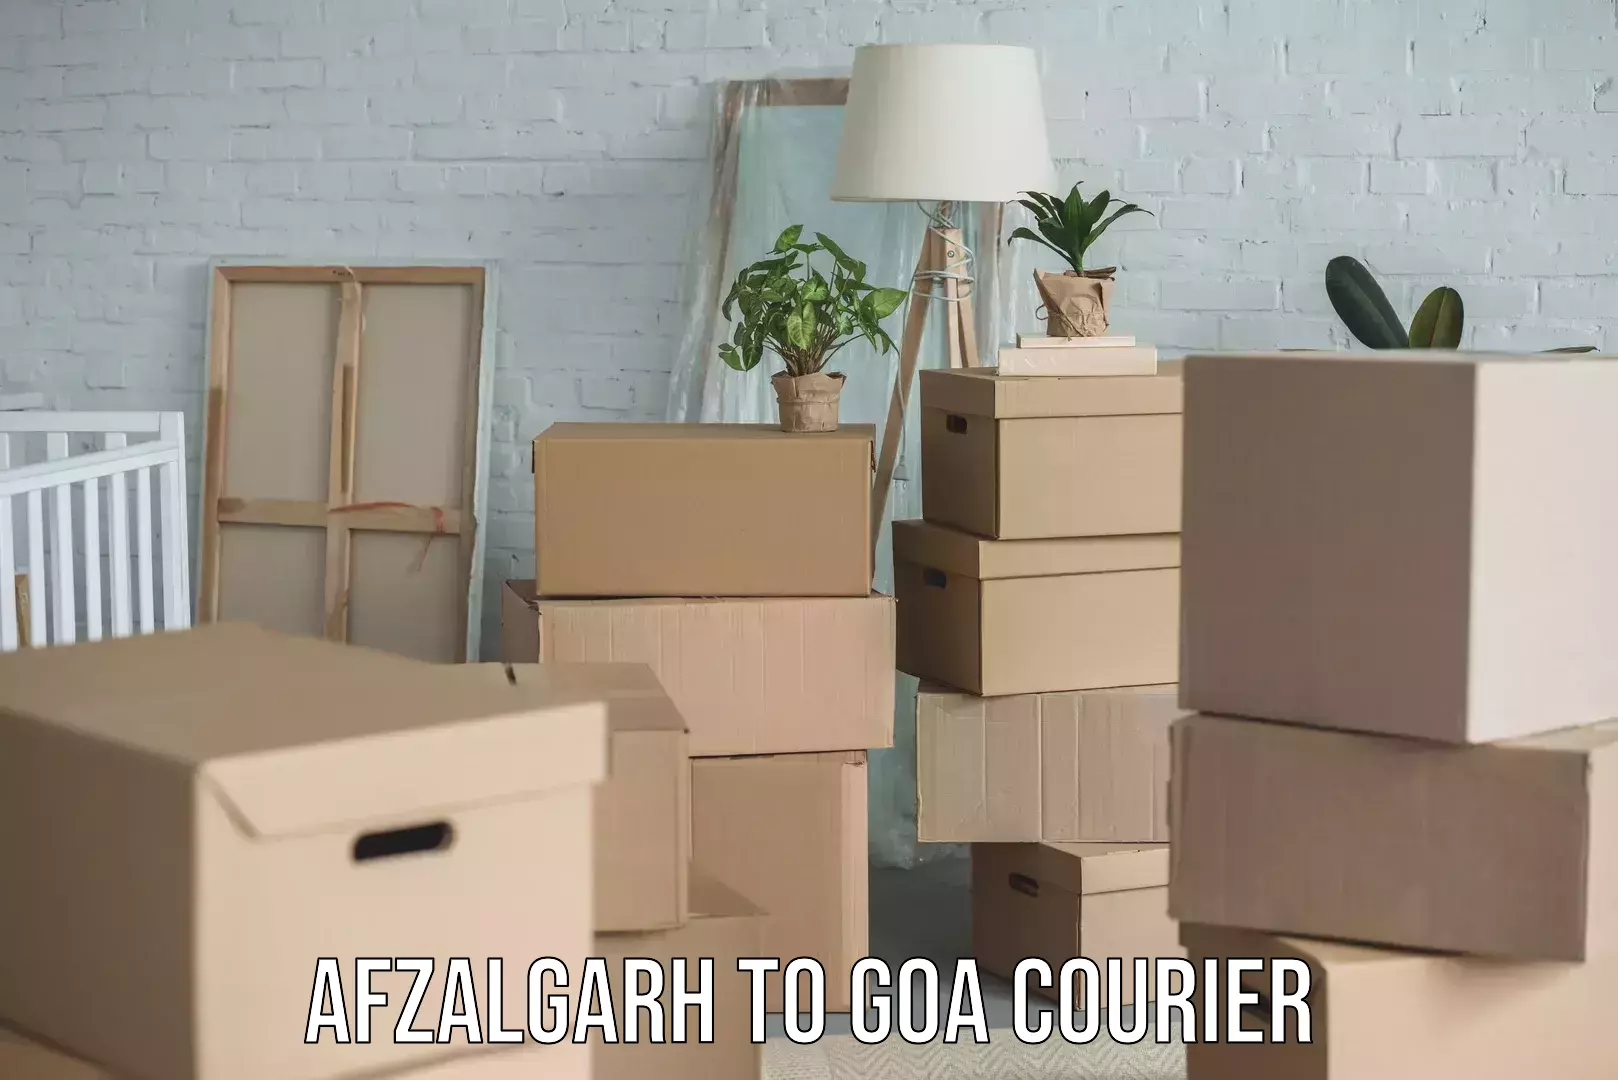 State-of-the-art courier technology Afzalgarh to Goa